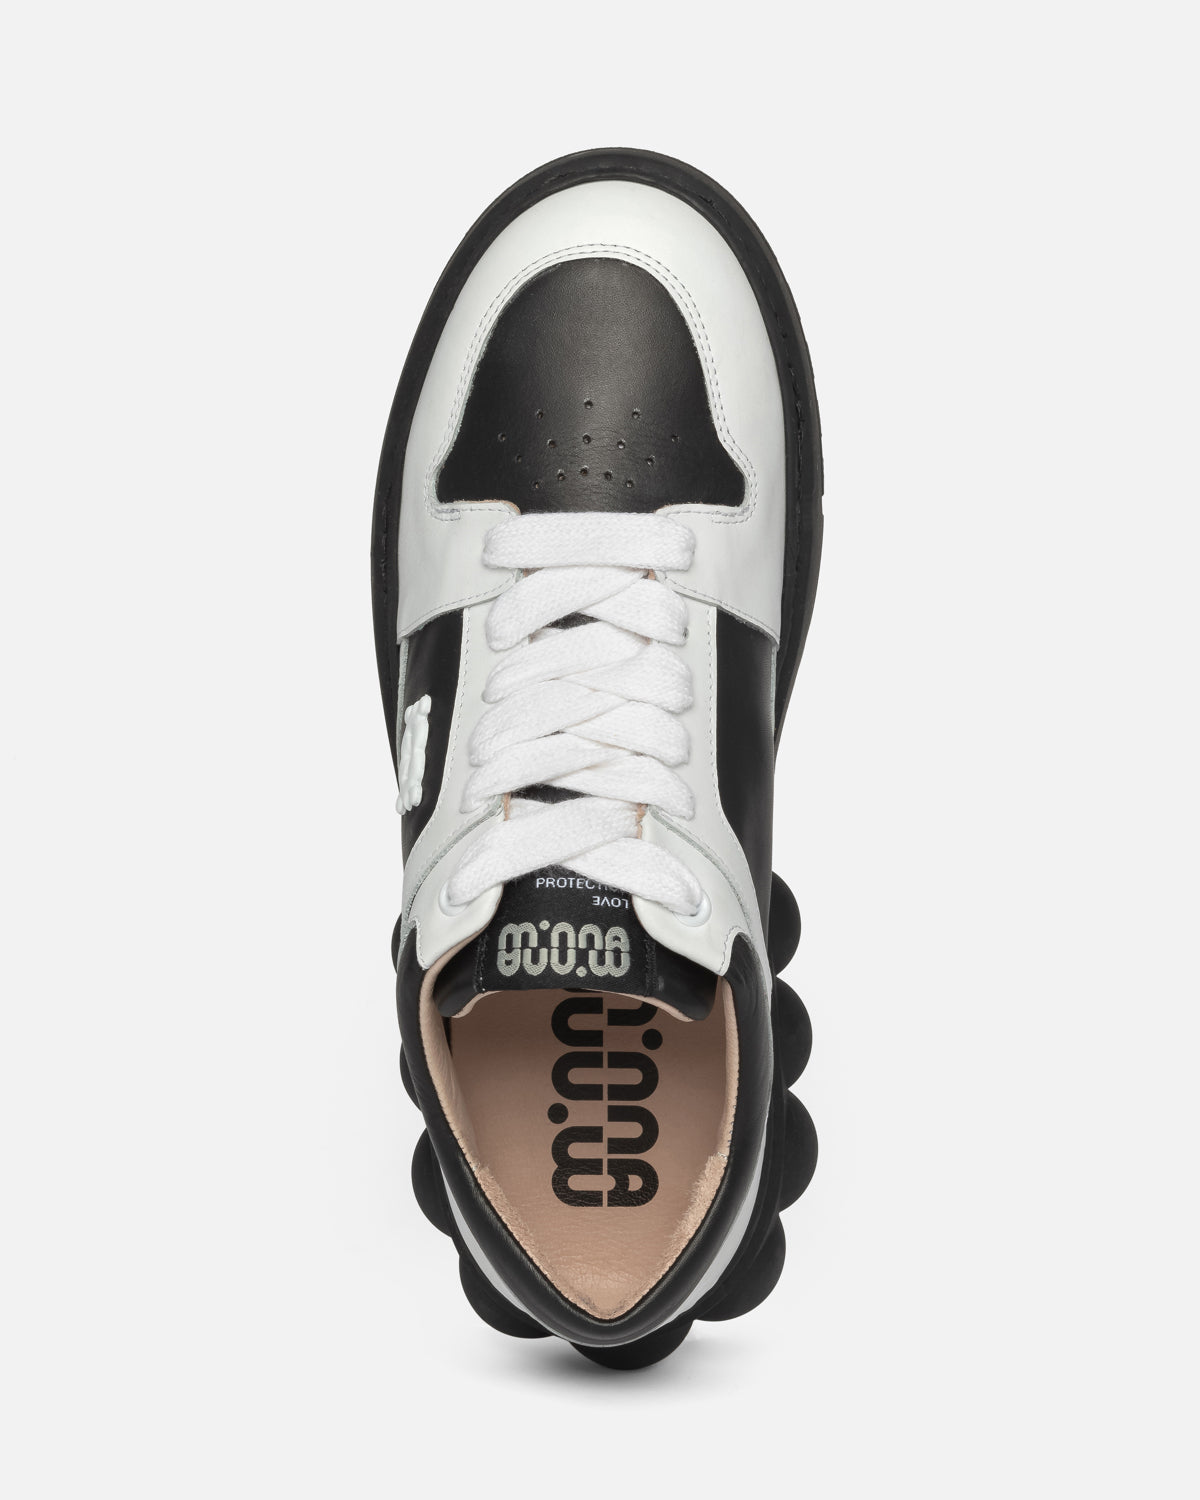 Oyster Black/White Leather